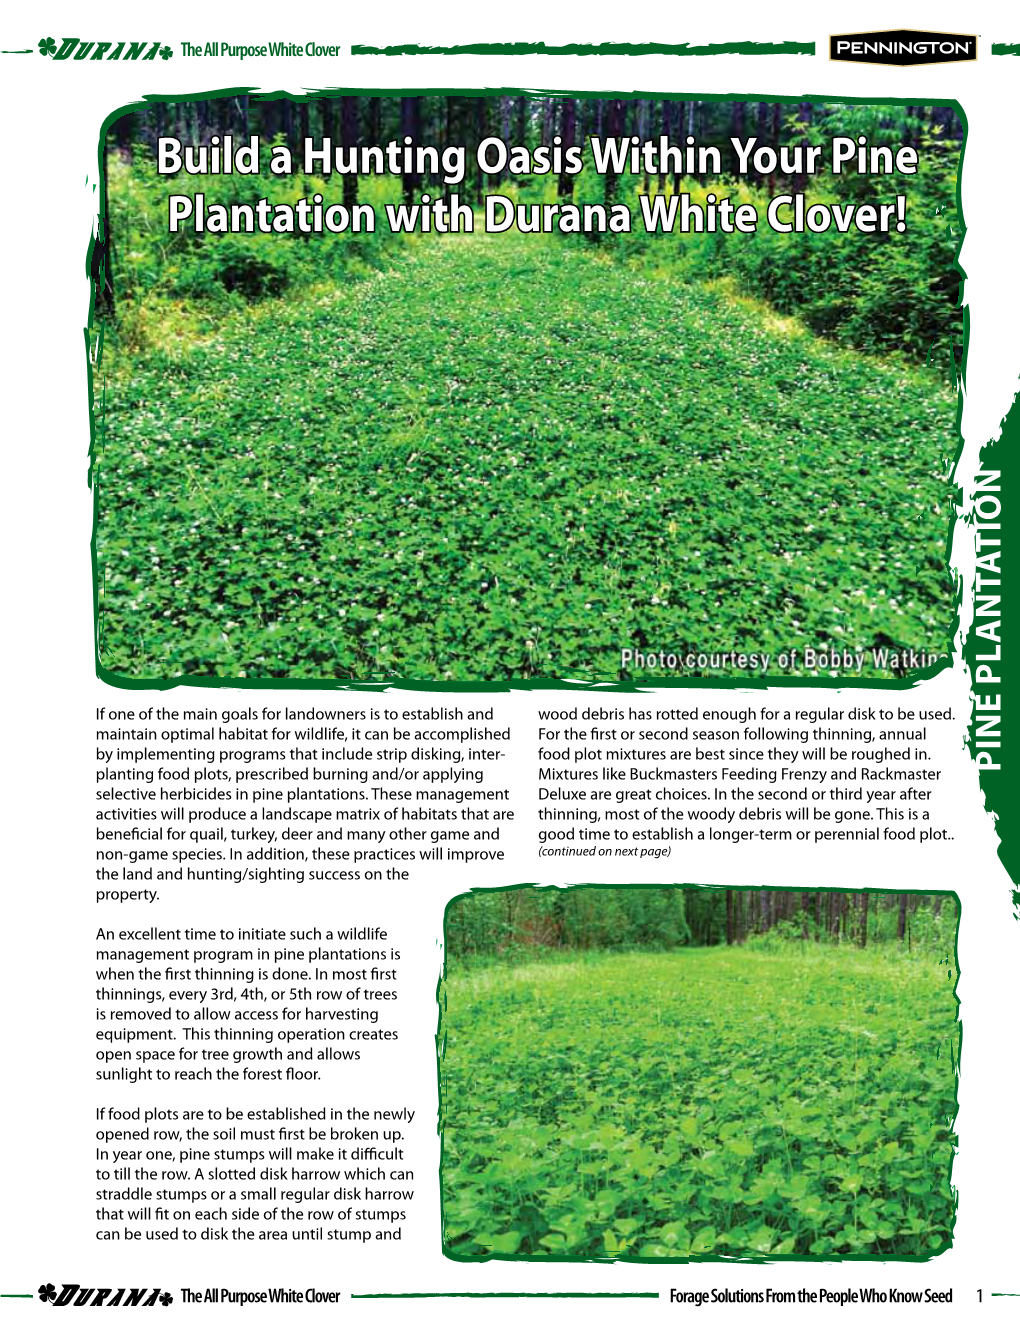 Build a Hunting Oasis Within Your Pine Plantation with Durana White Clover!